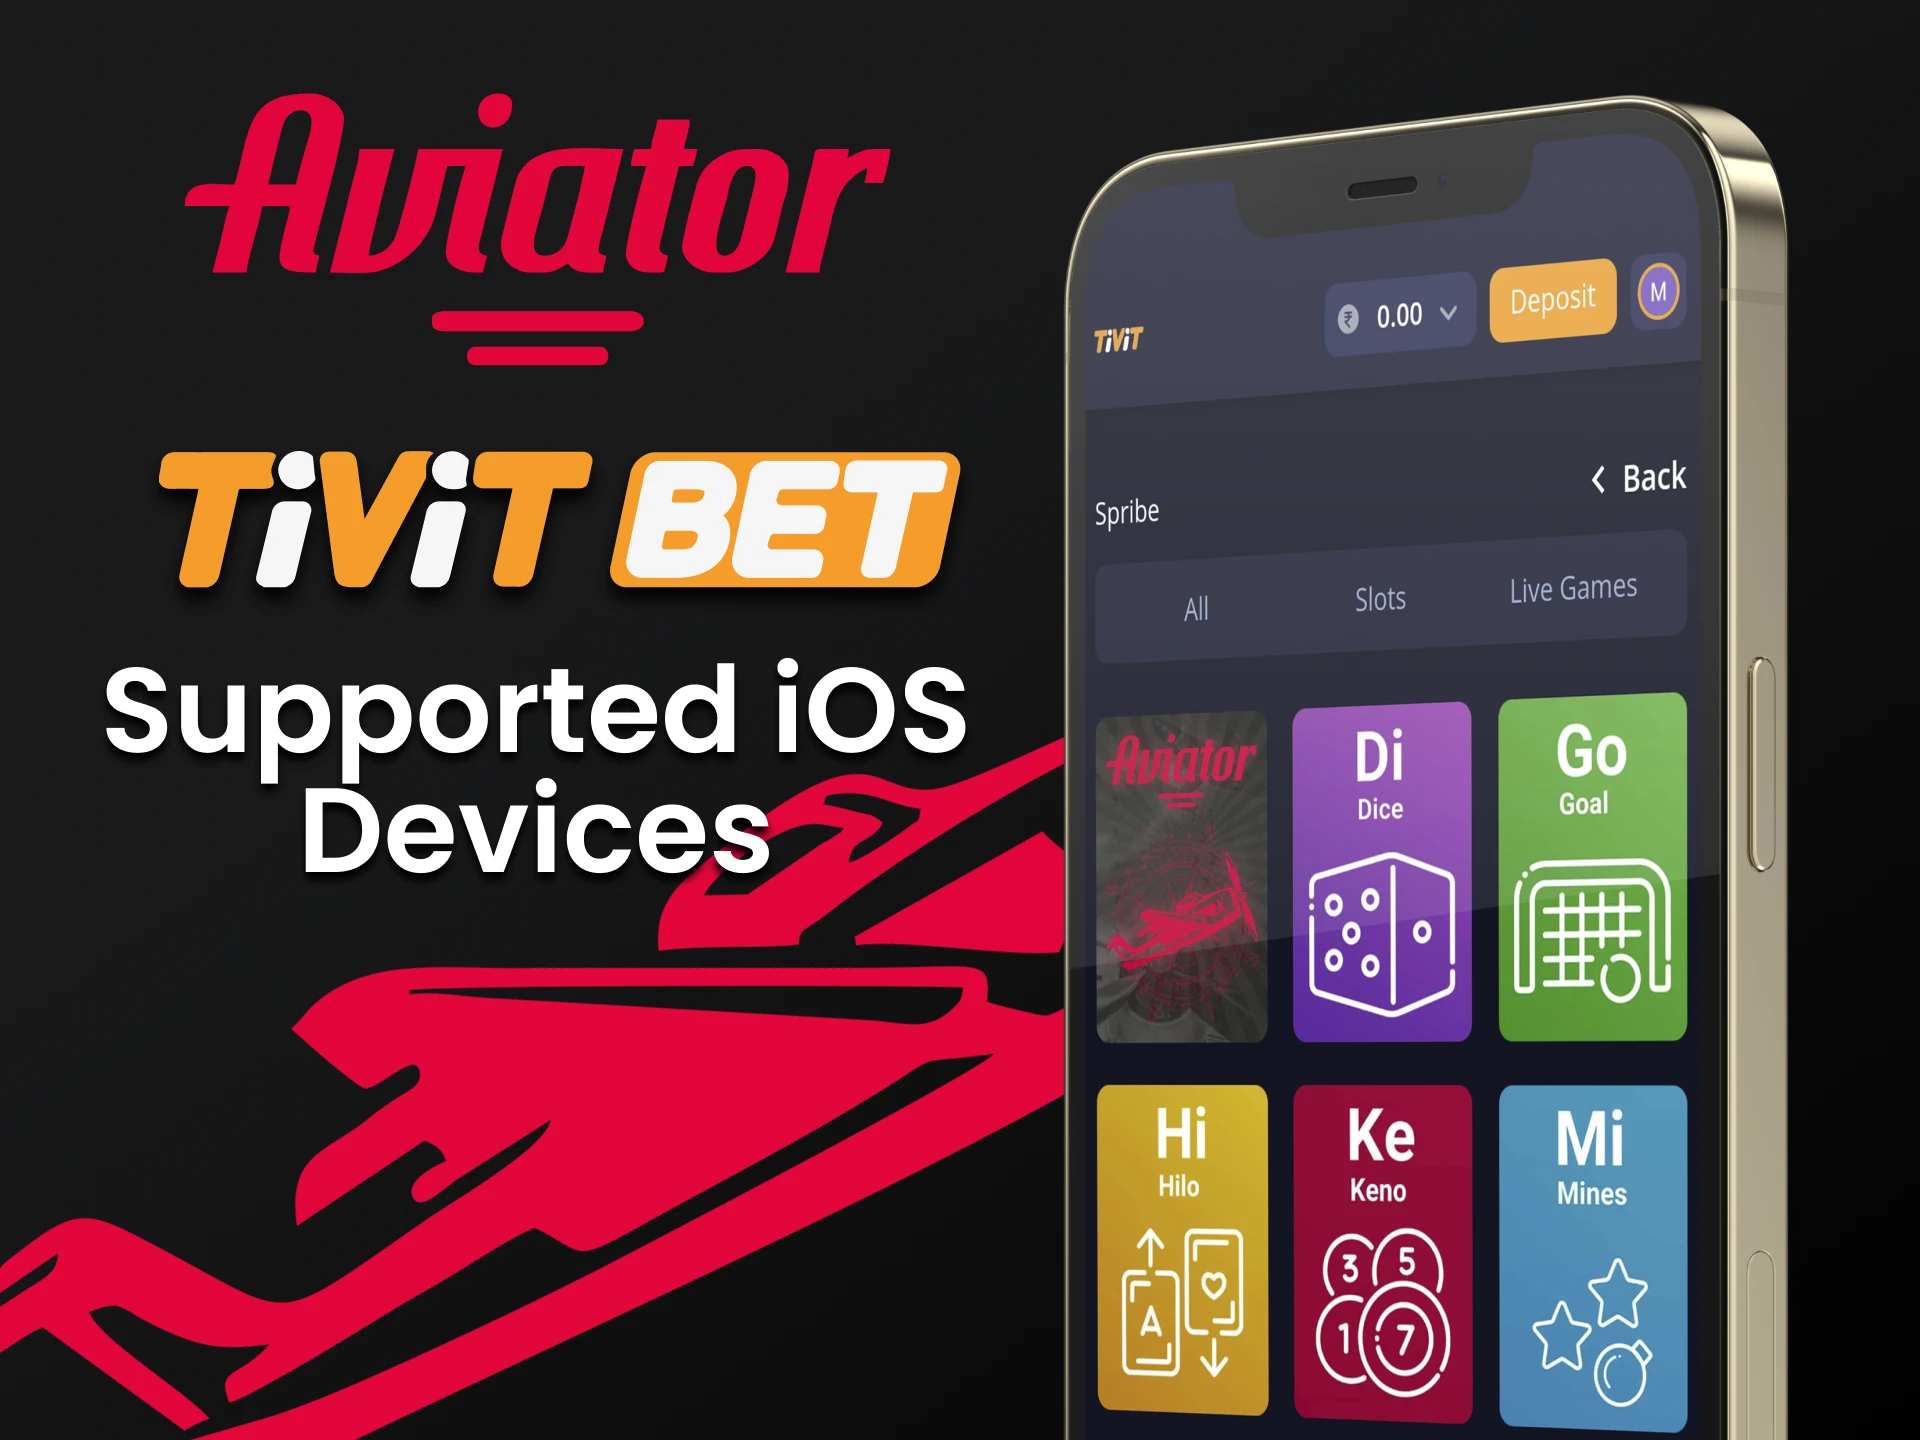 Choose iOS devices to play Aviator in the Tivitbet app.